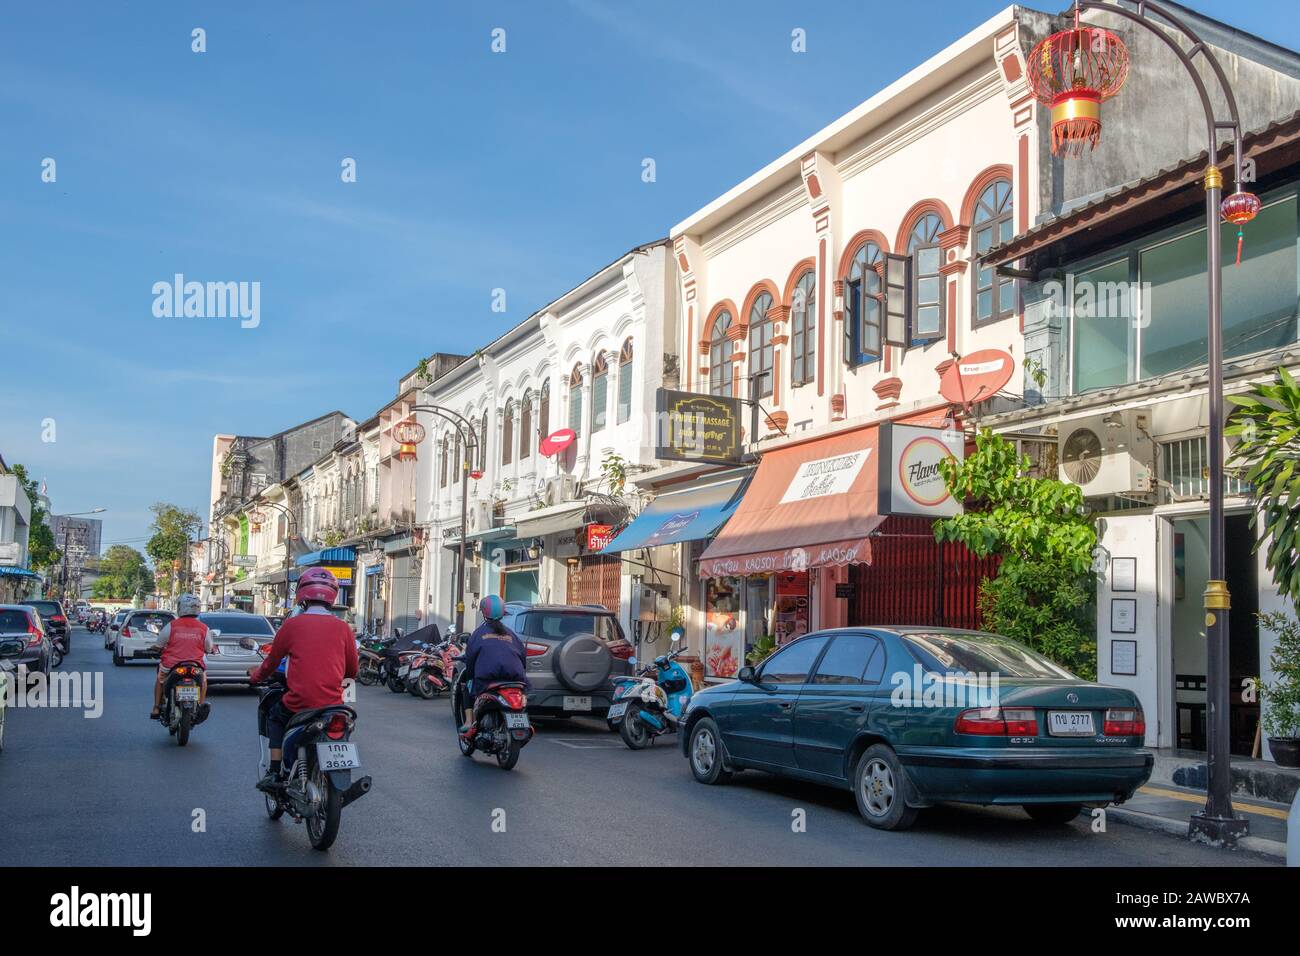 Phuket Old Town also regarded as Chinatown in Phuket is a popular travel destination characterized by Sino-Portuguese architecture. Stock Photo